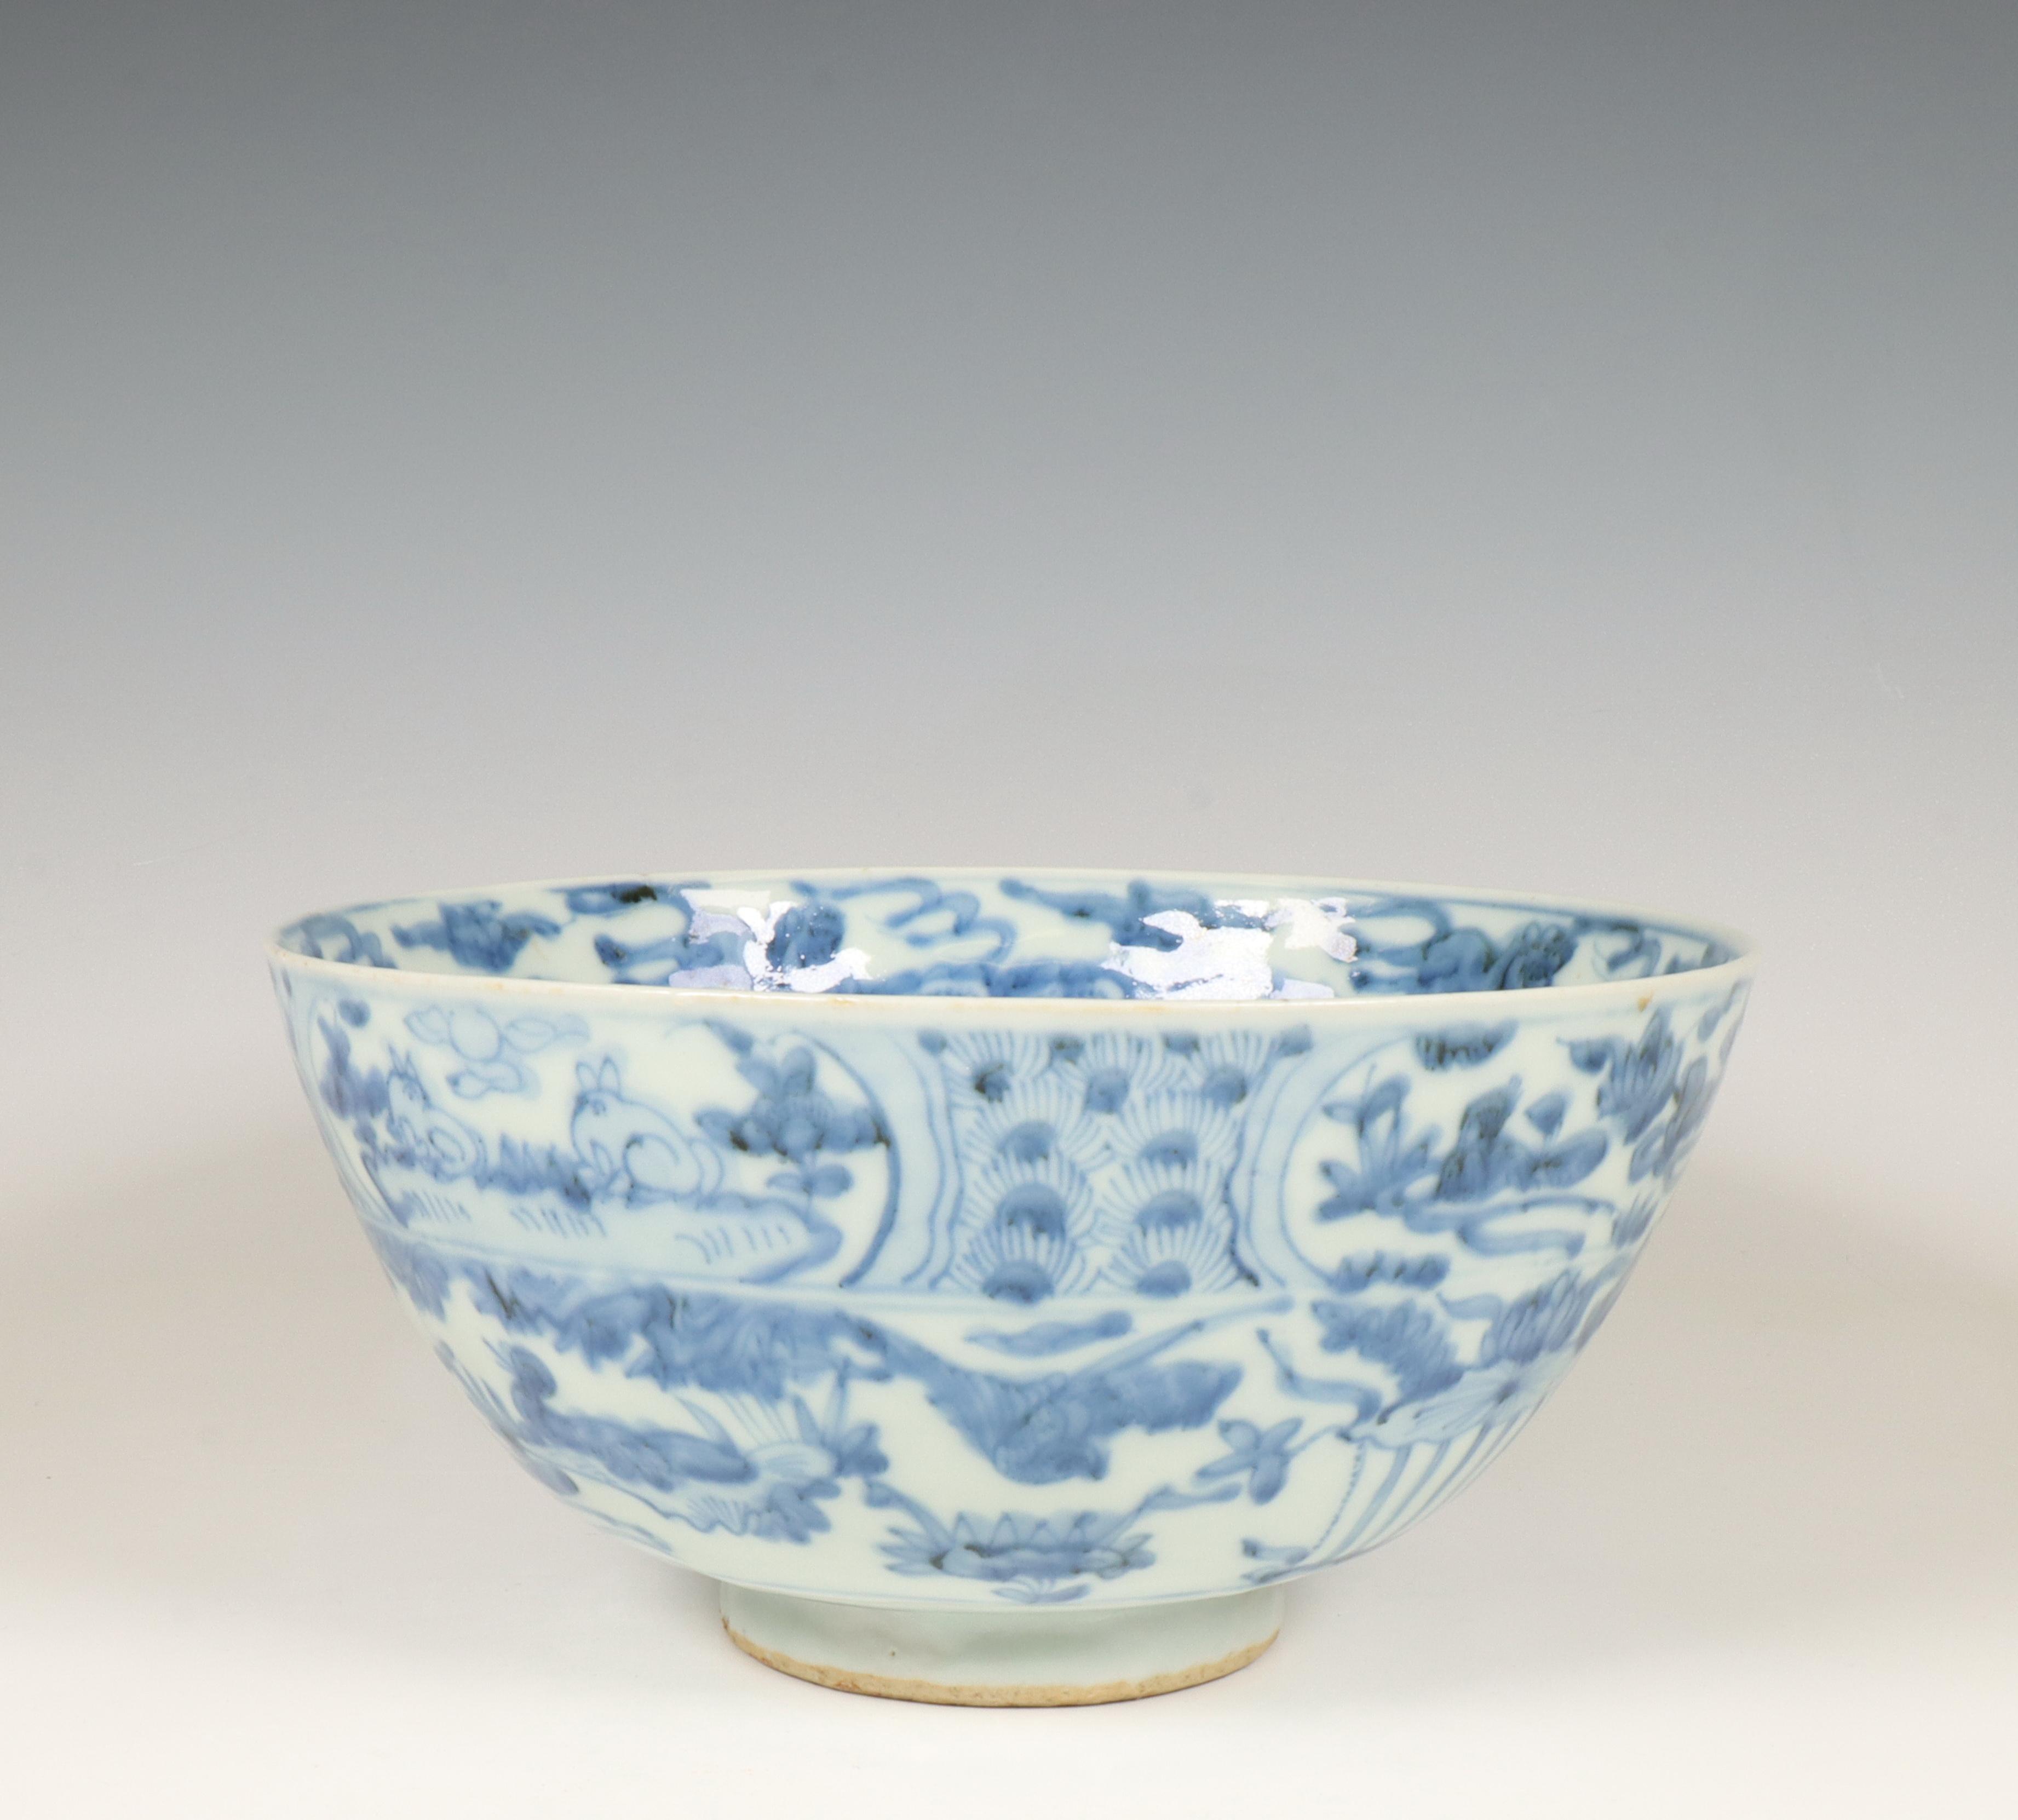 China, a blue and white porcelain bowl, late Ming dynasty (1368-1644), - Image 7 of 11